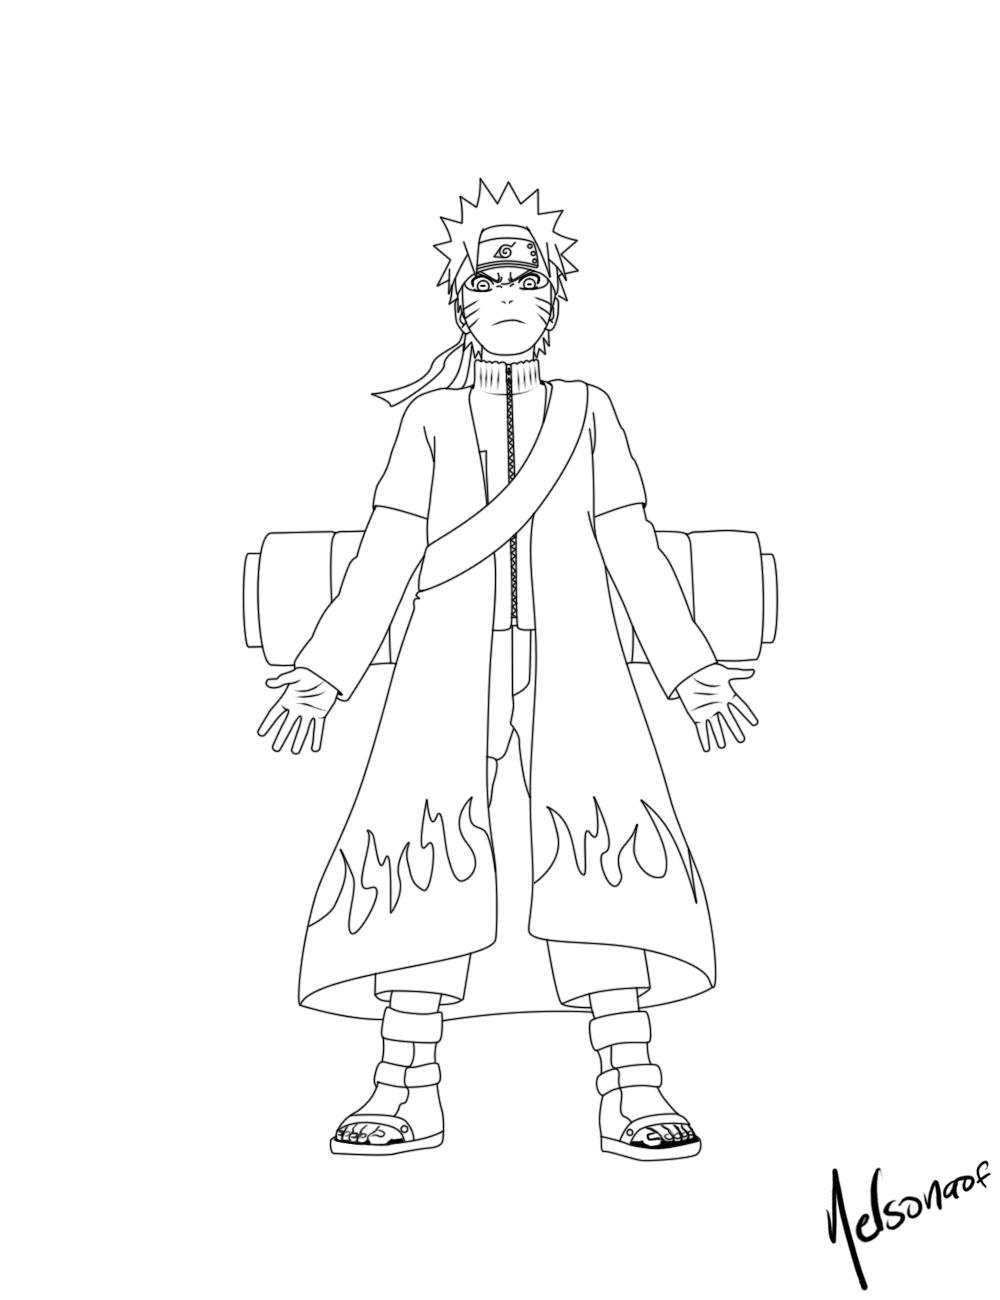 Naruto Shippuden Coloring Pages To Print | Coloring pages wallpaper